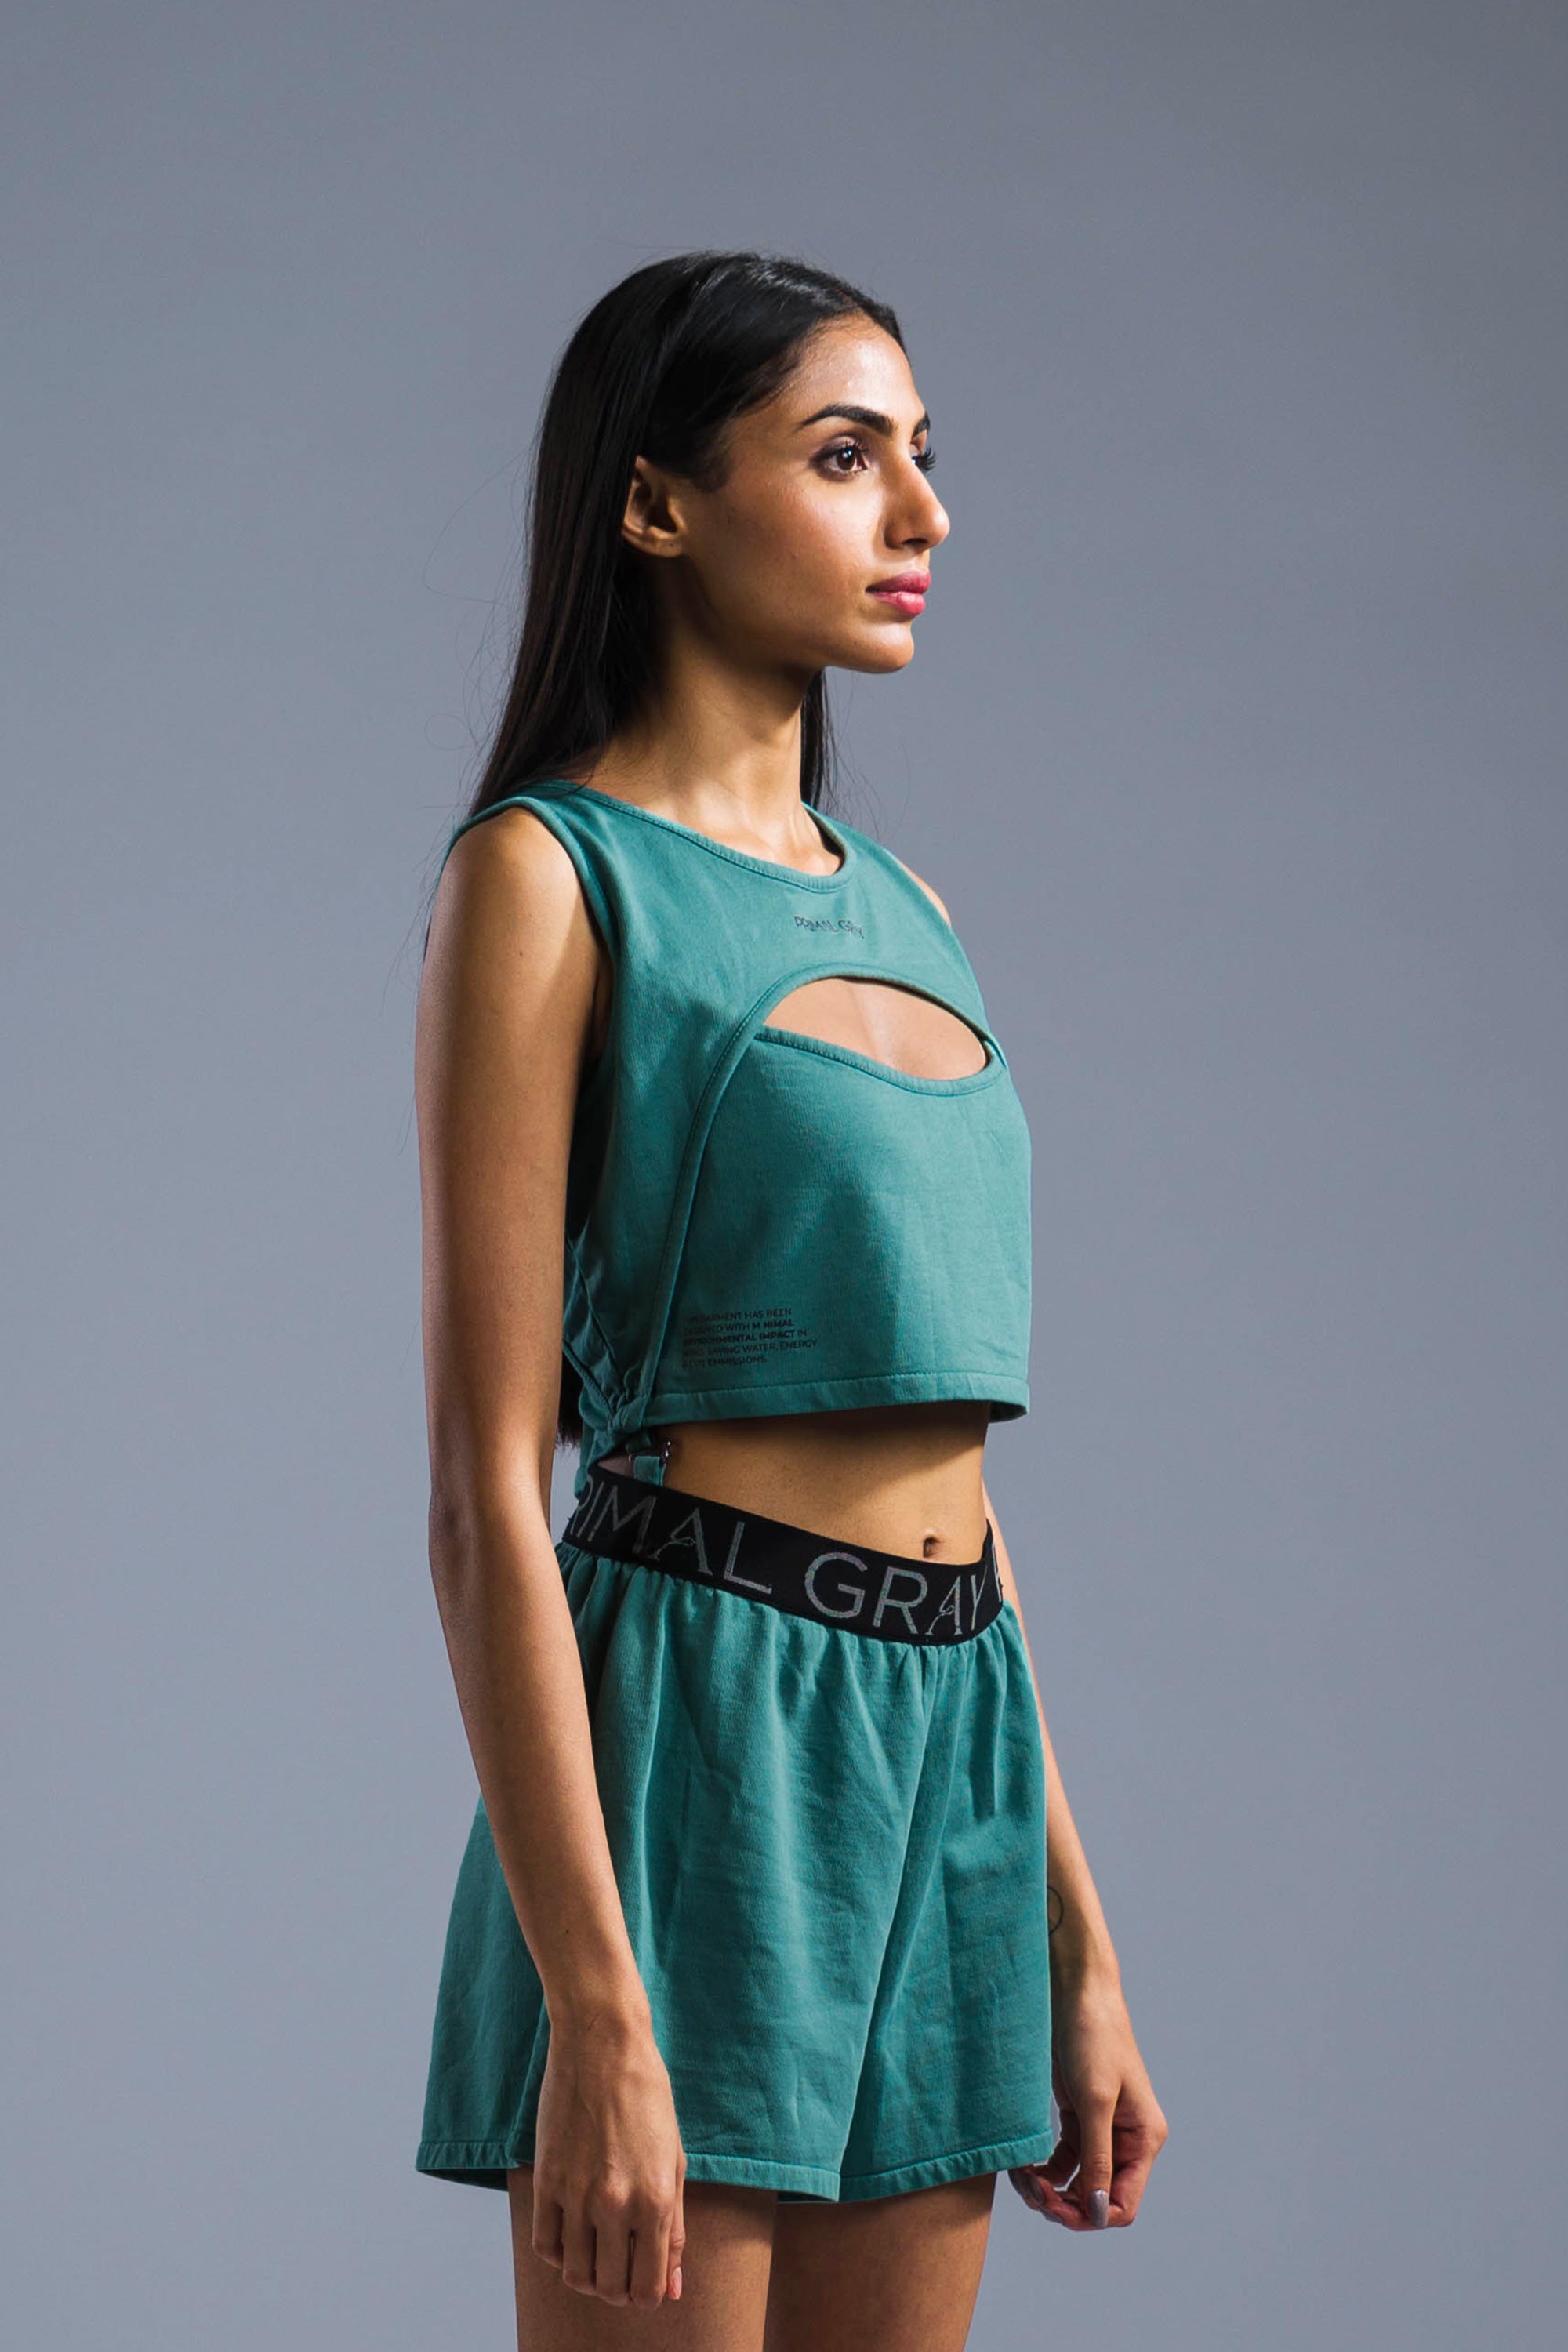 Women's Summer Co-Ord Sets: A Guide to Finding Your Perfect Look - Issuu